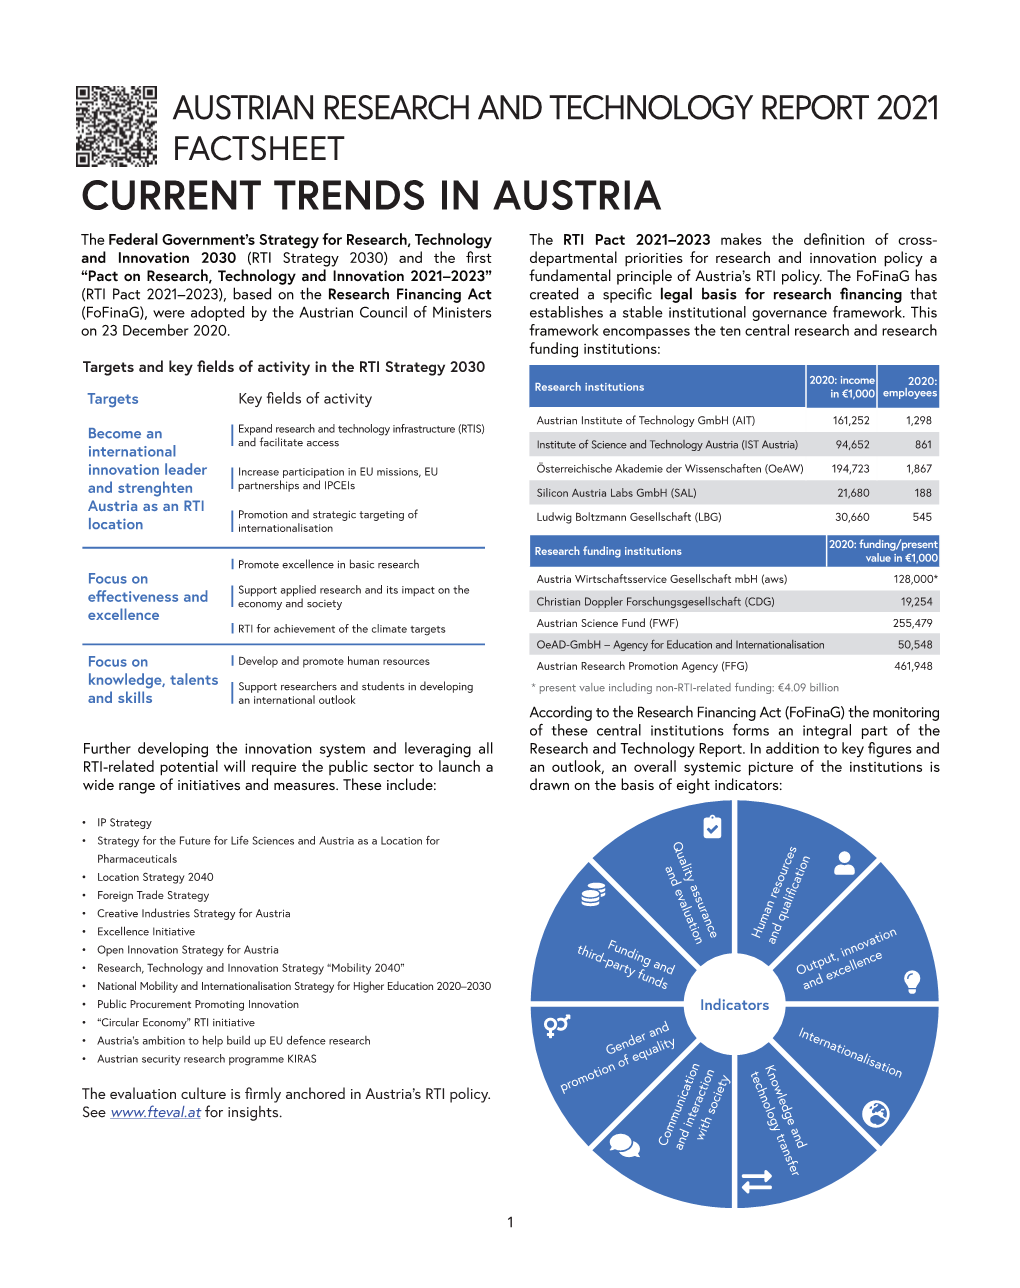 Austrian Research and Technology Report 2021 Factsheet